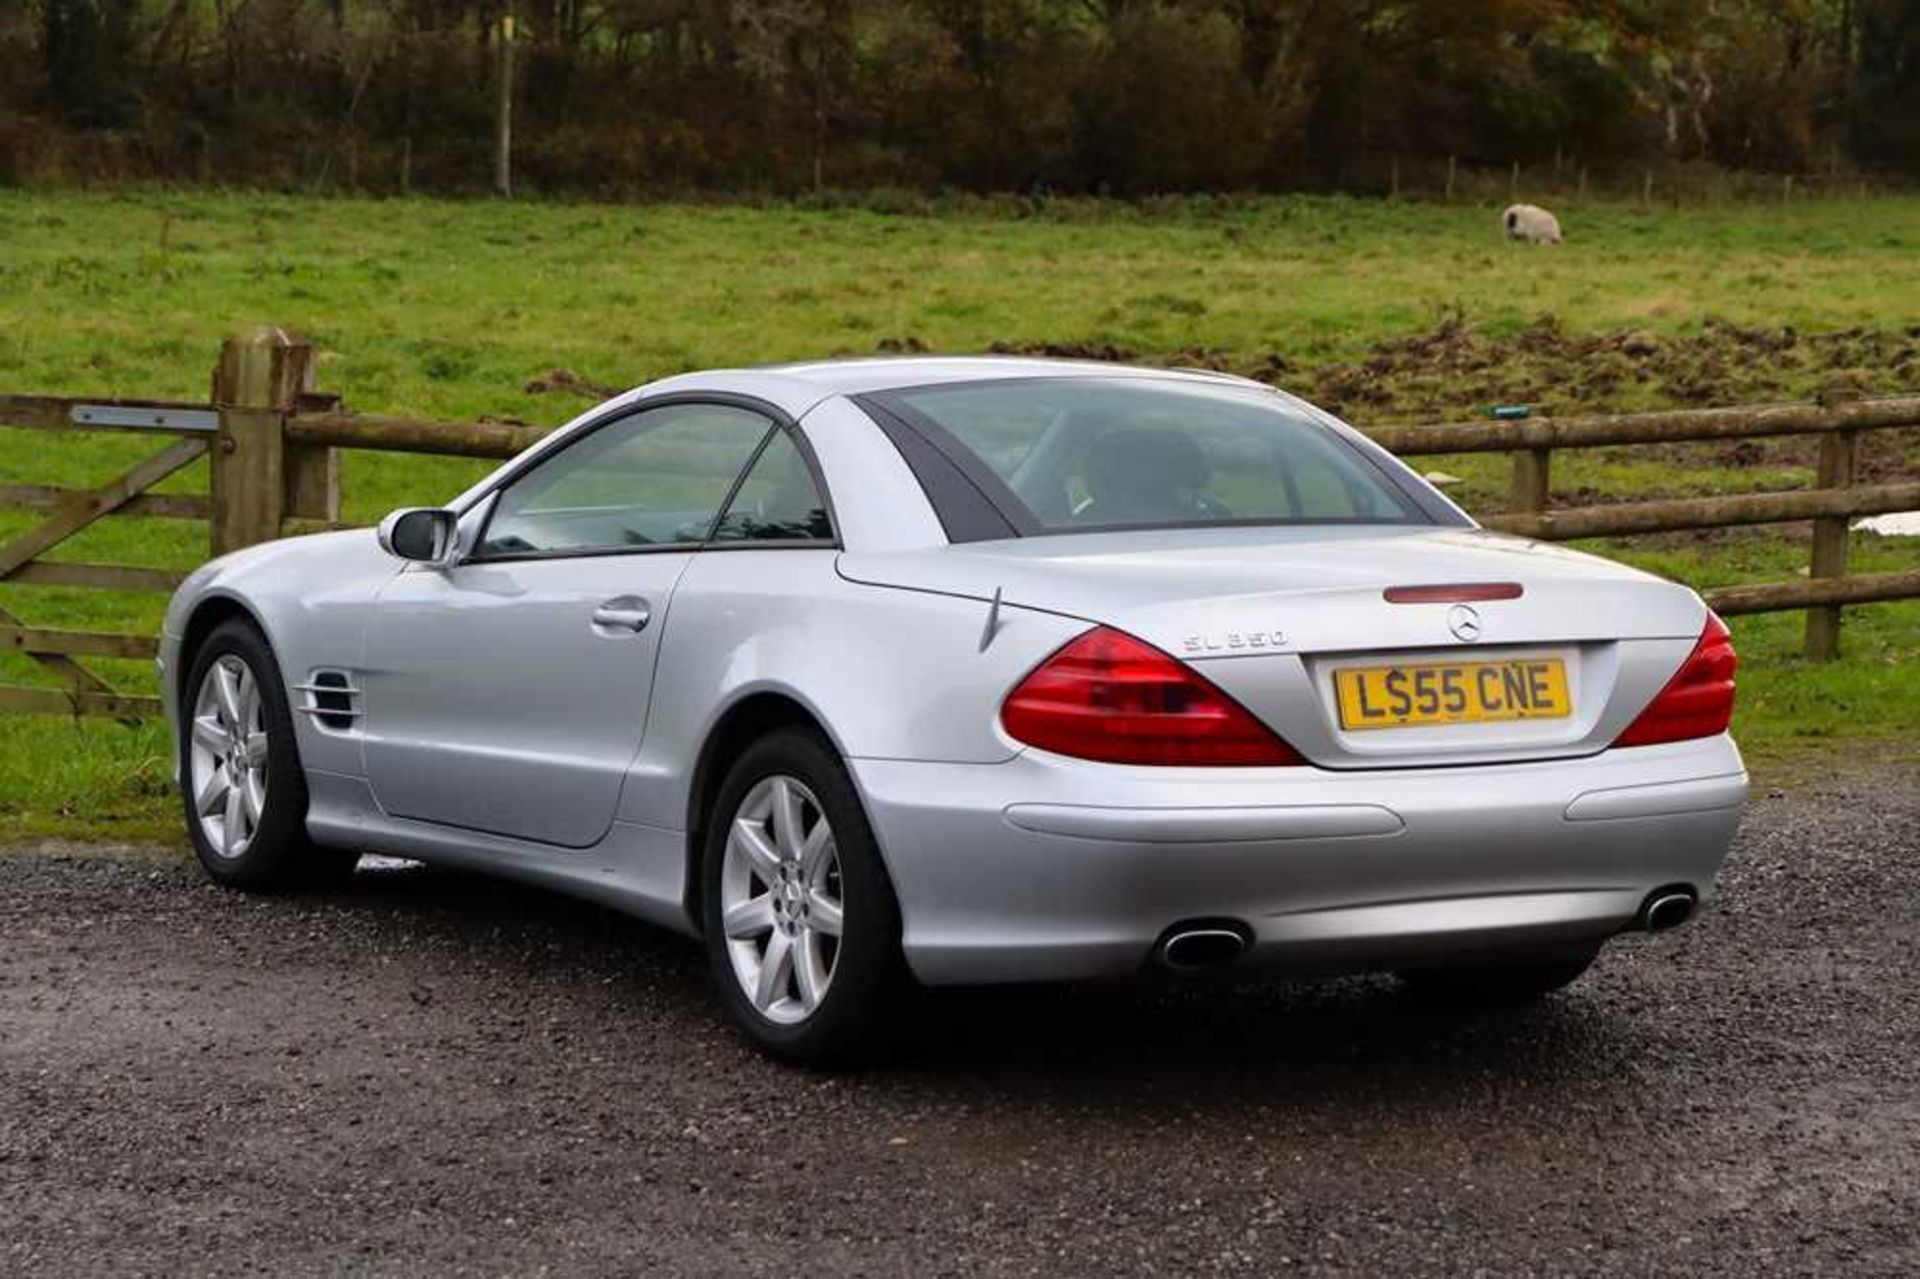 2005 Mercedes-Benz SL 350 Just 34,800 miles from new - Image 20 of 75